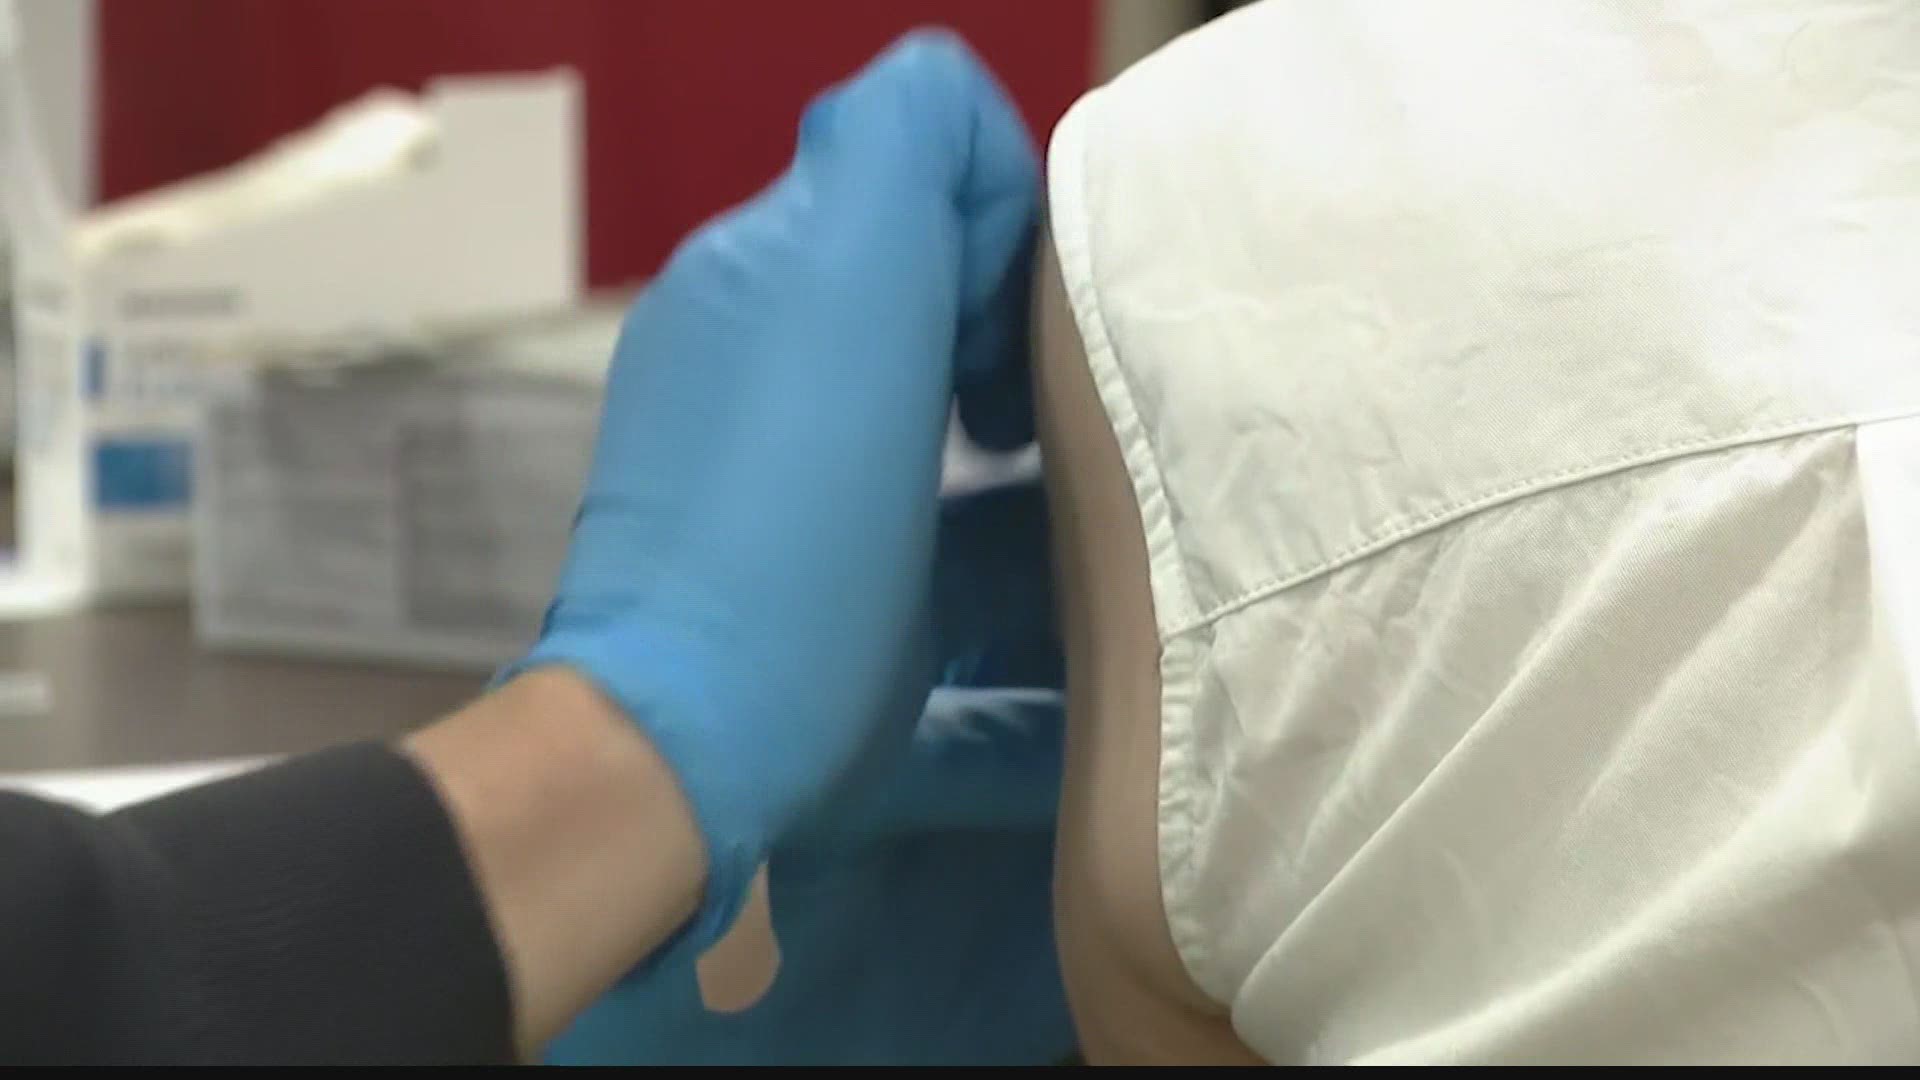 More people in Alabama are eligible to get the COVID vaccine, but the slow vaccine rollout could mean masking for longer.